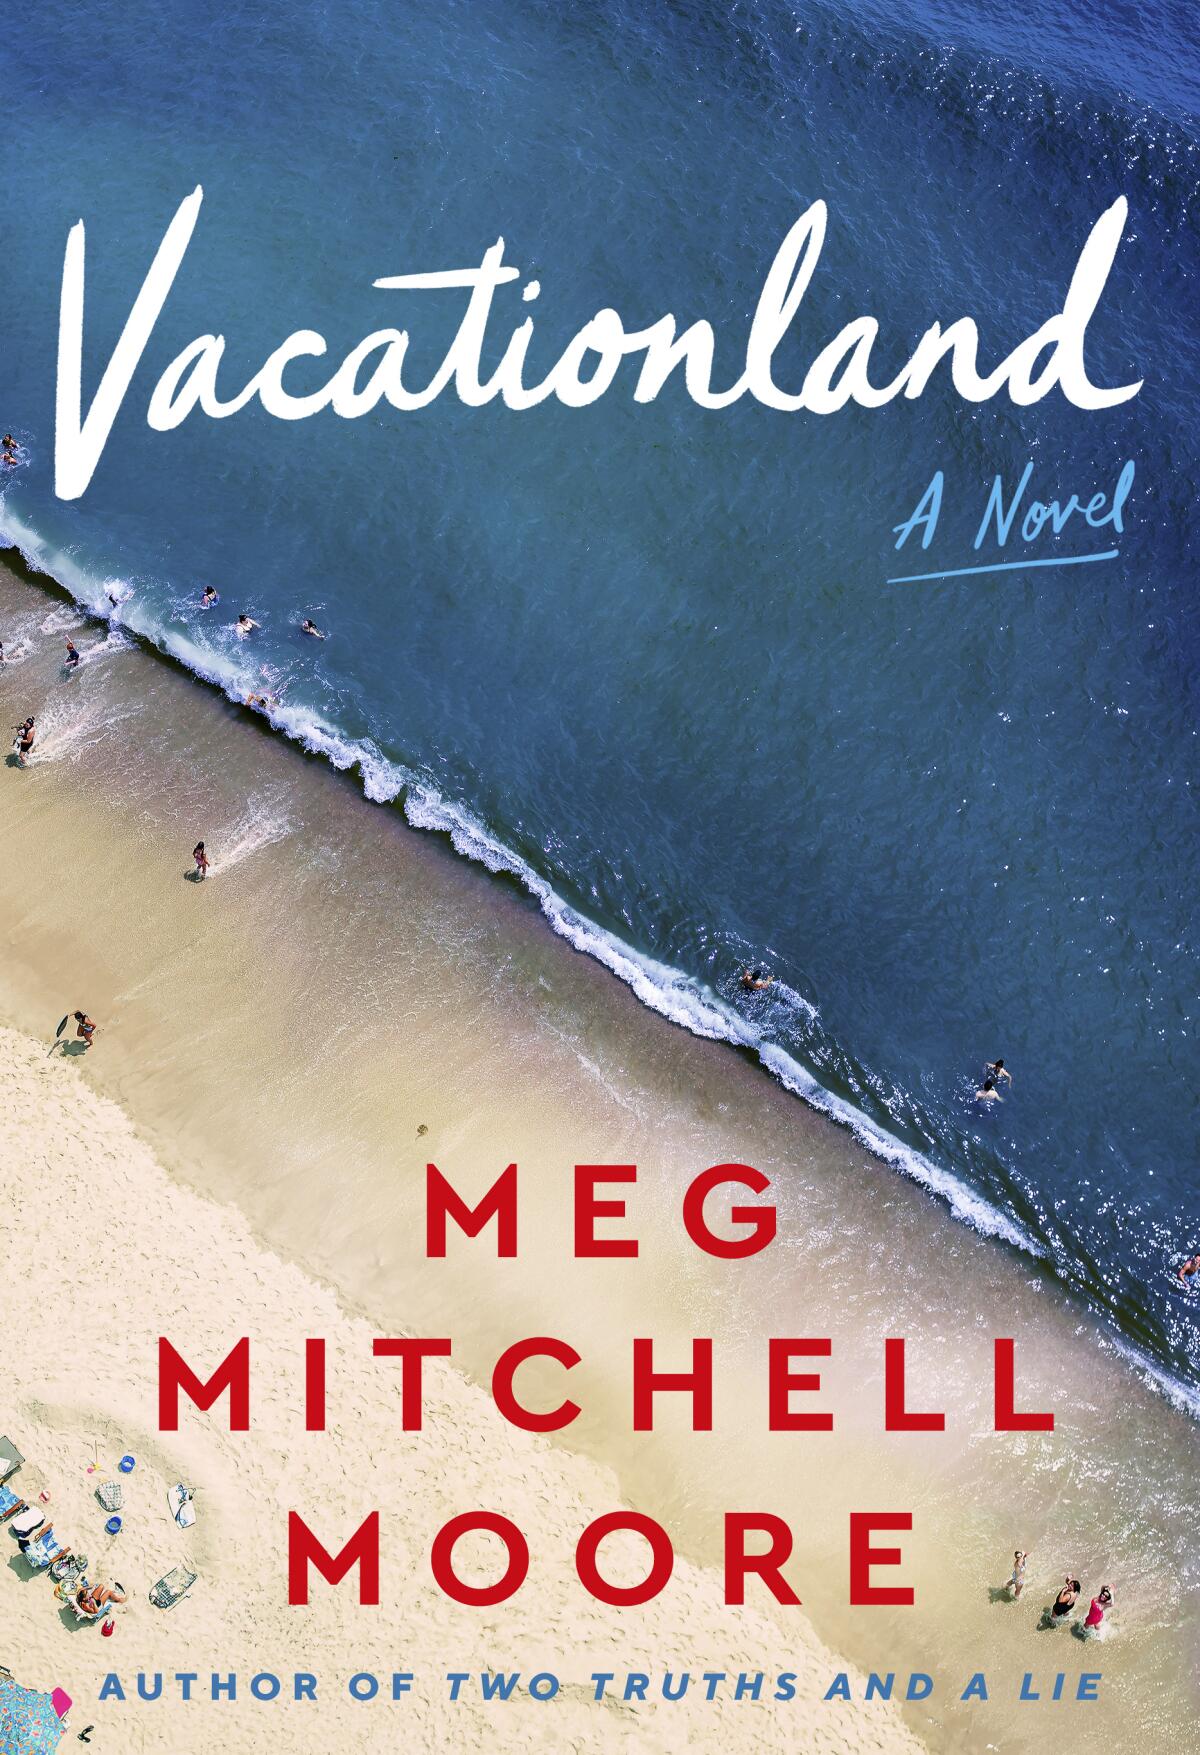 This cover image released by William Morrow shows "Vacationland" by Meg Mitchell Moore. (William Morrow via AP)